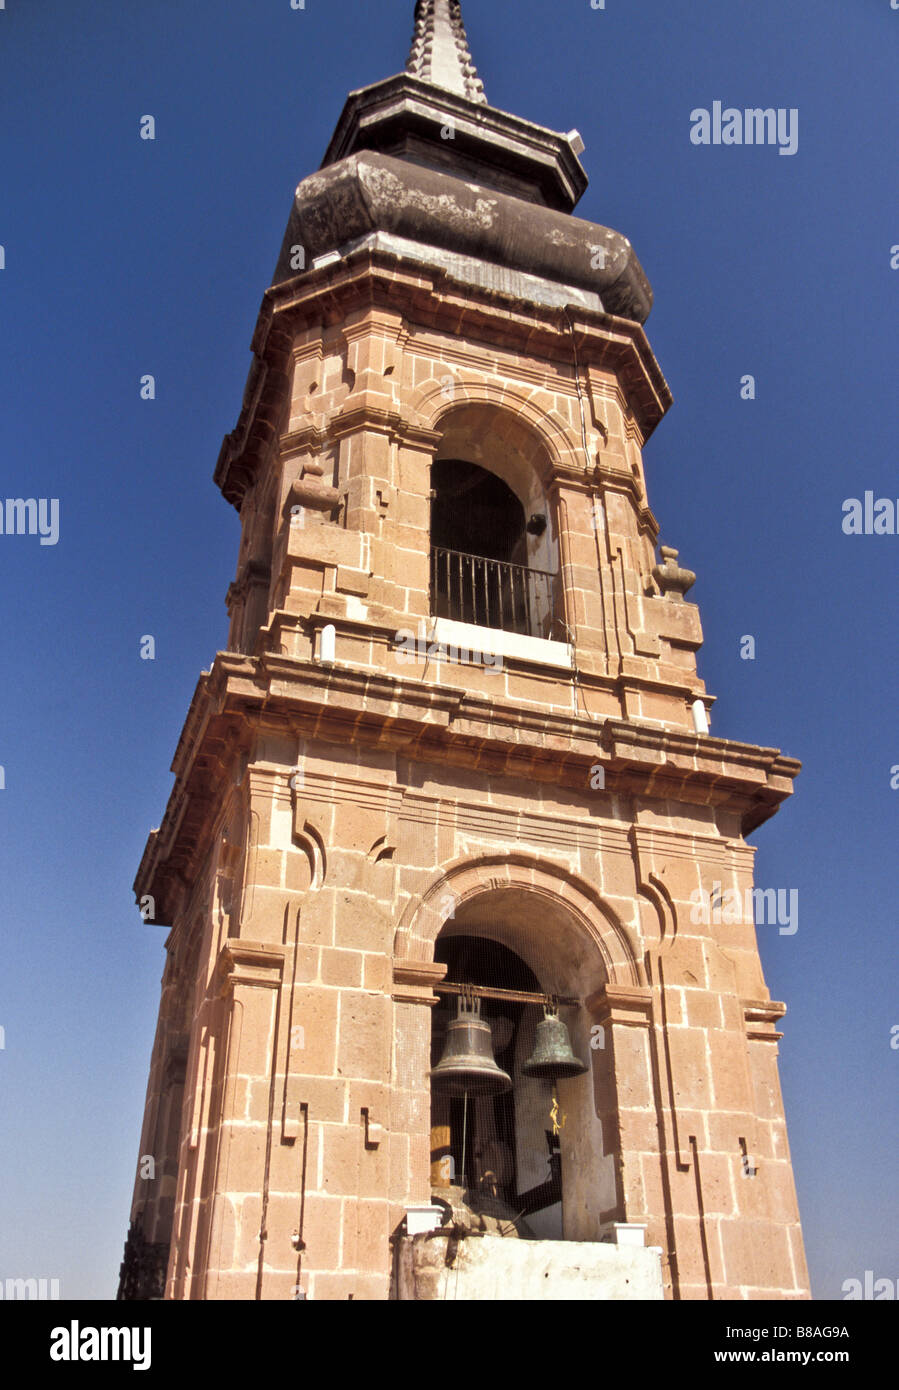 The bell tower on top of  the Templo de Santa Rosa de Viterbo.  Built in 1752, the temple is in Queretaro, Mexico Stock Photo